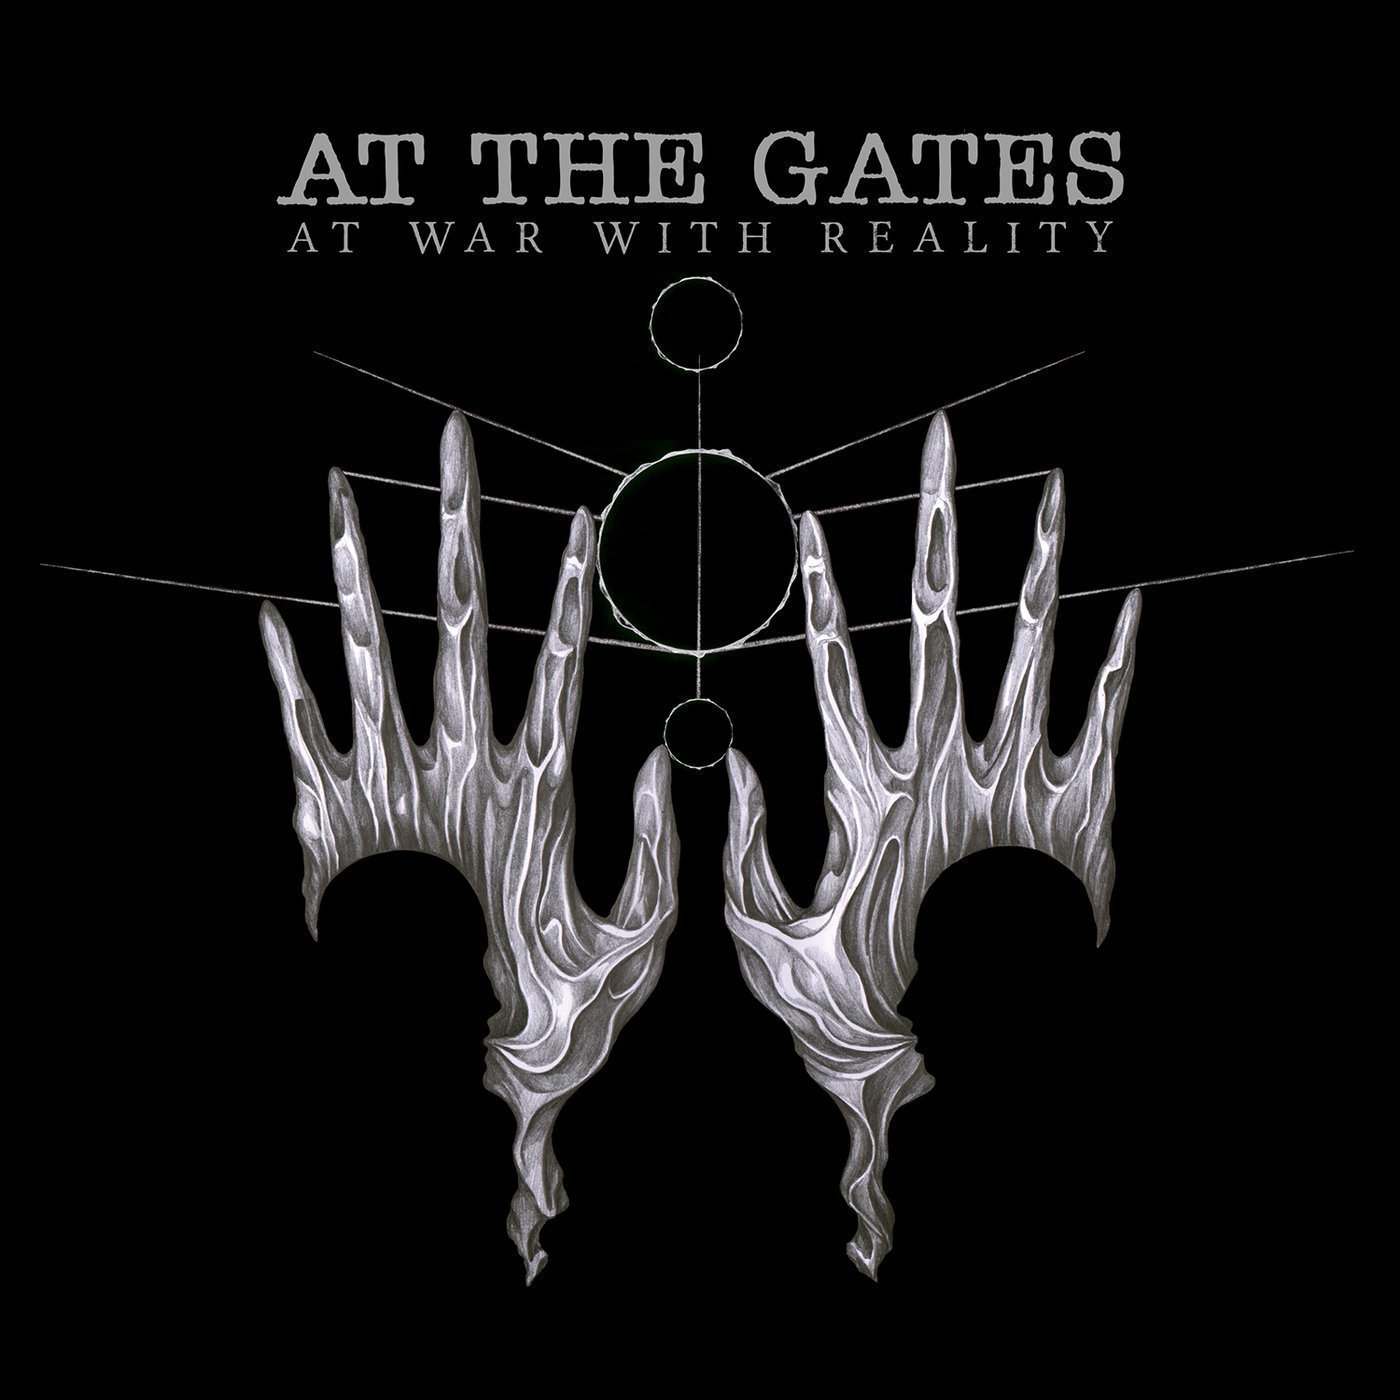 Disco de vinil At The Gates At War With Reality (LP)